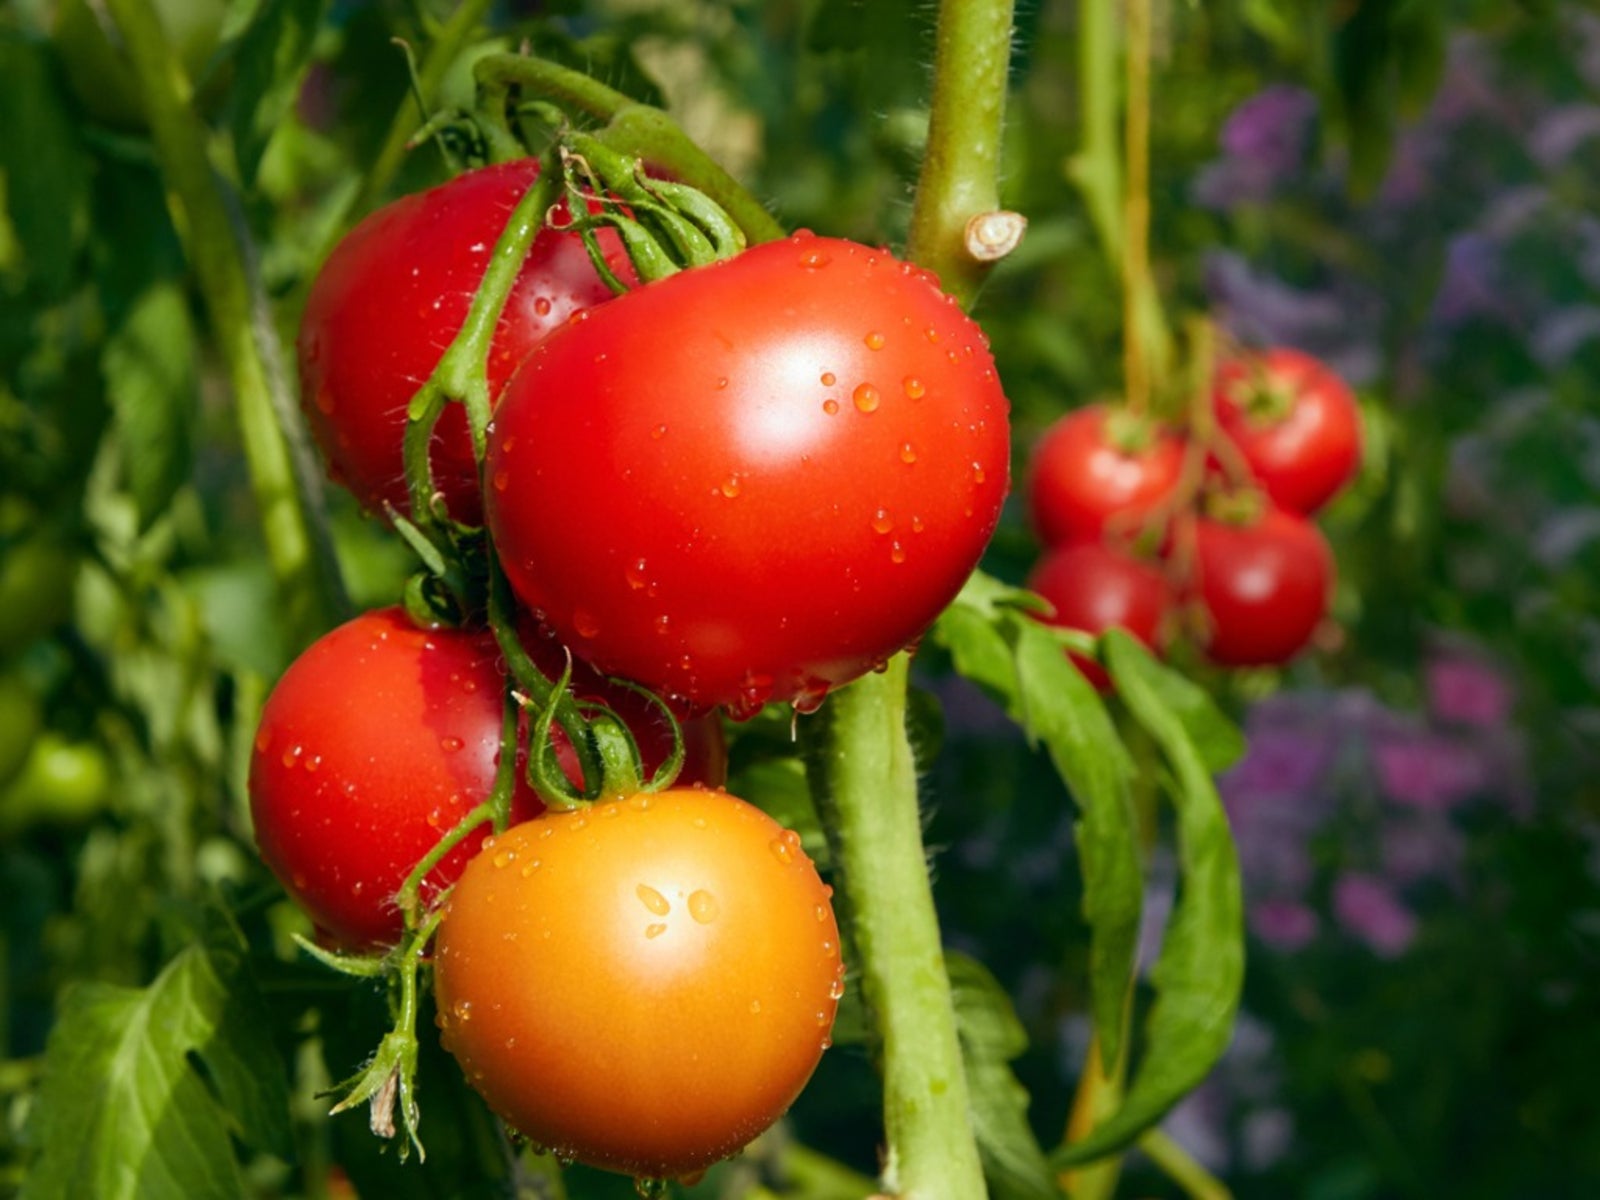 Tomatoes growing on a plant